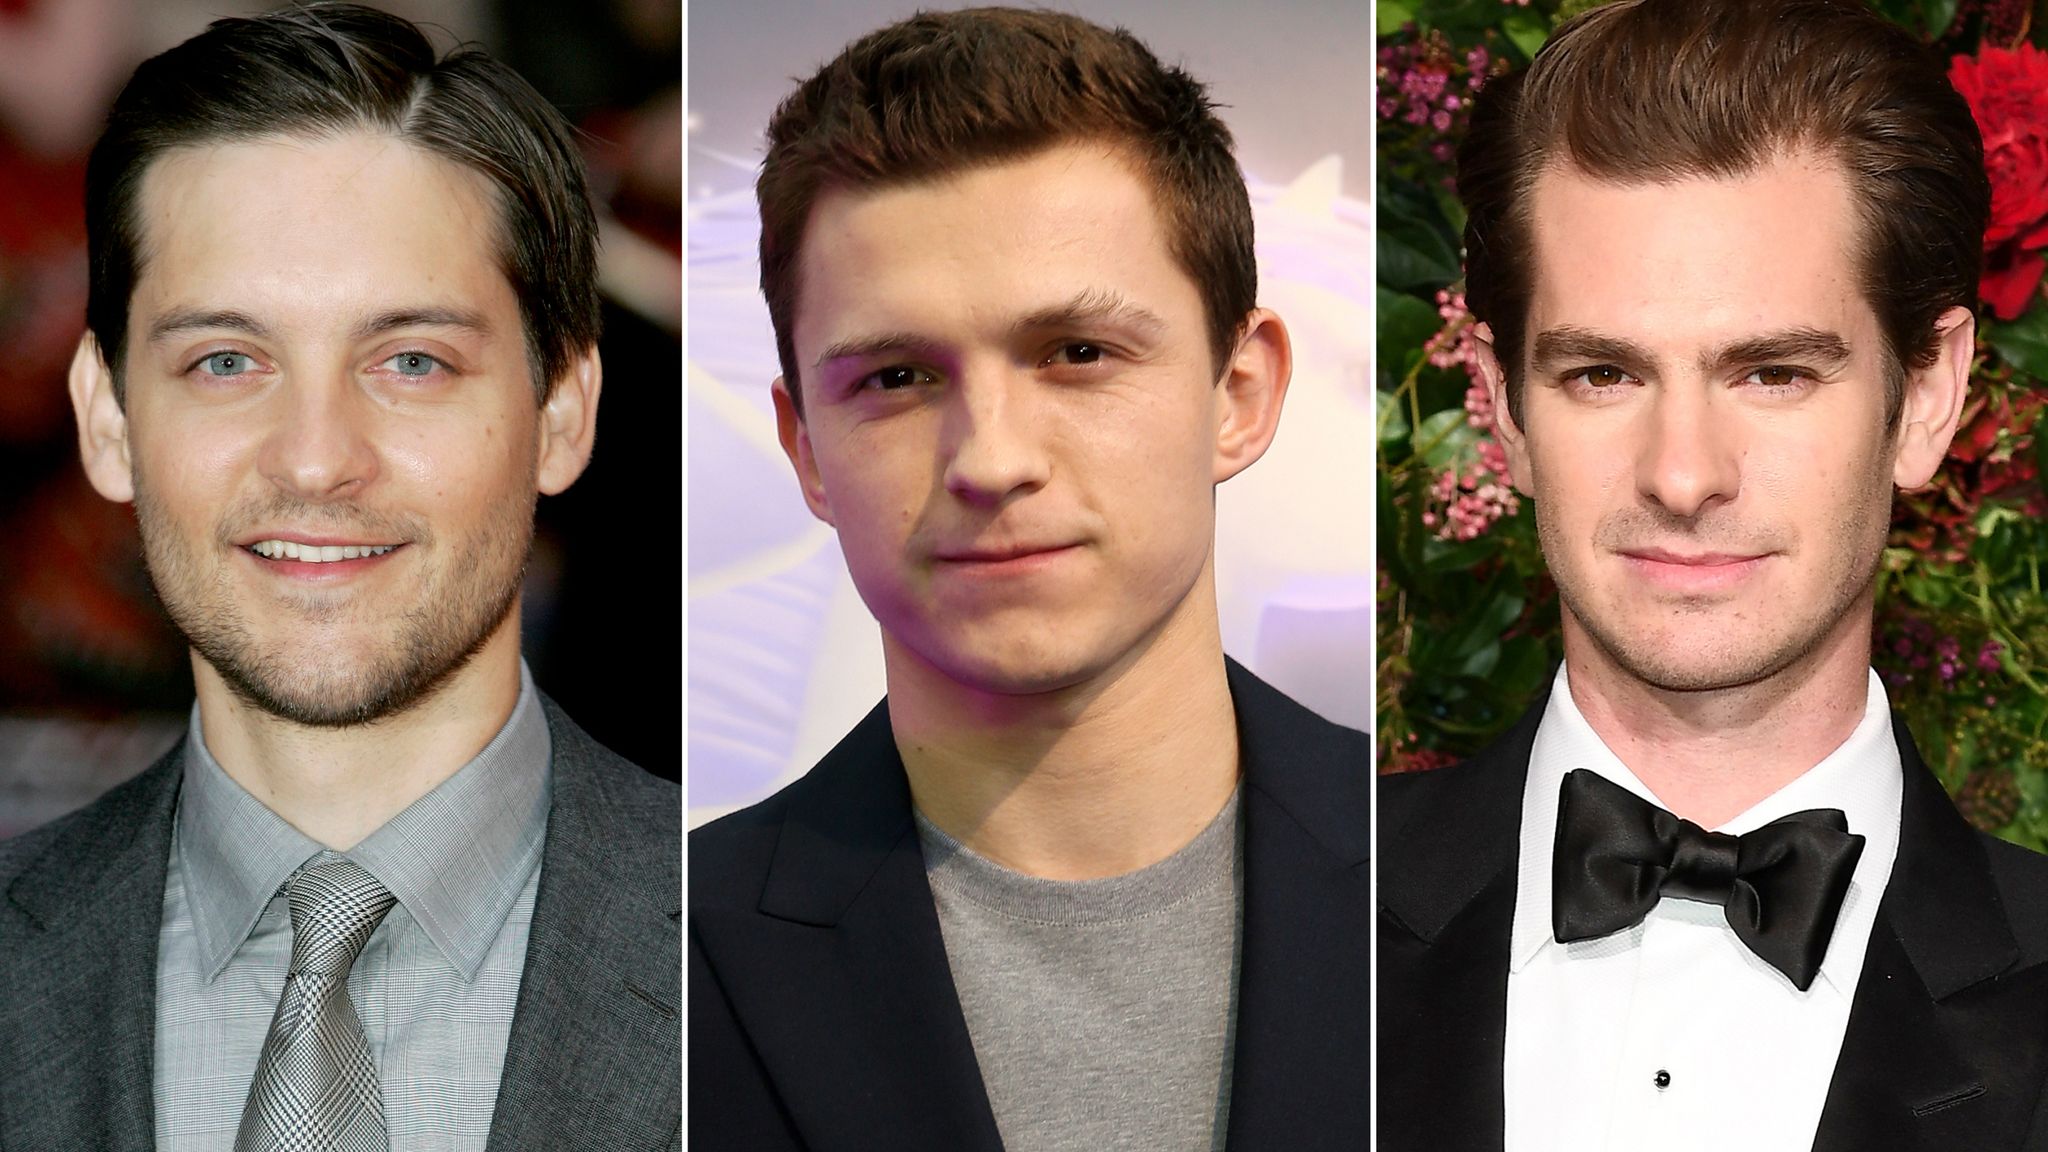 Spider Man 3 Tobey Maguire And Andrew Garfield To Reprise Web Slinging Roles Alongside Tom Holland Reports Ents Arts News Sky News